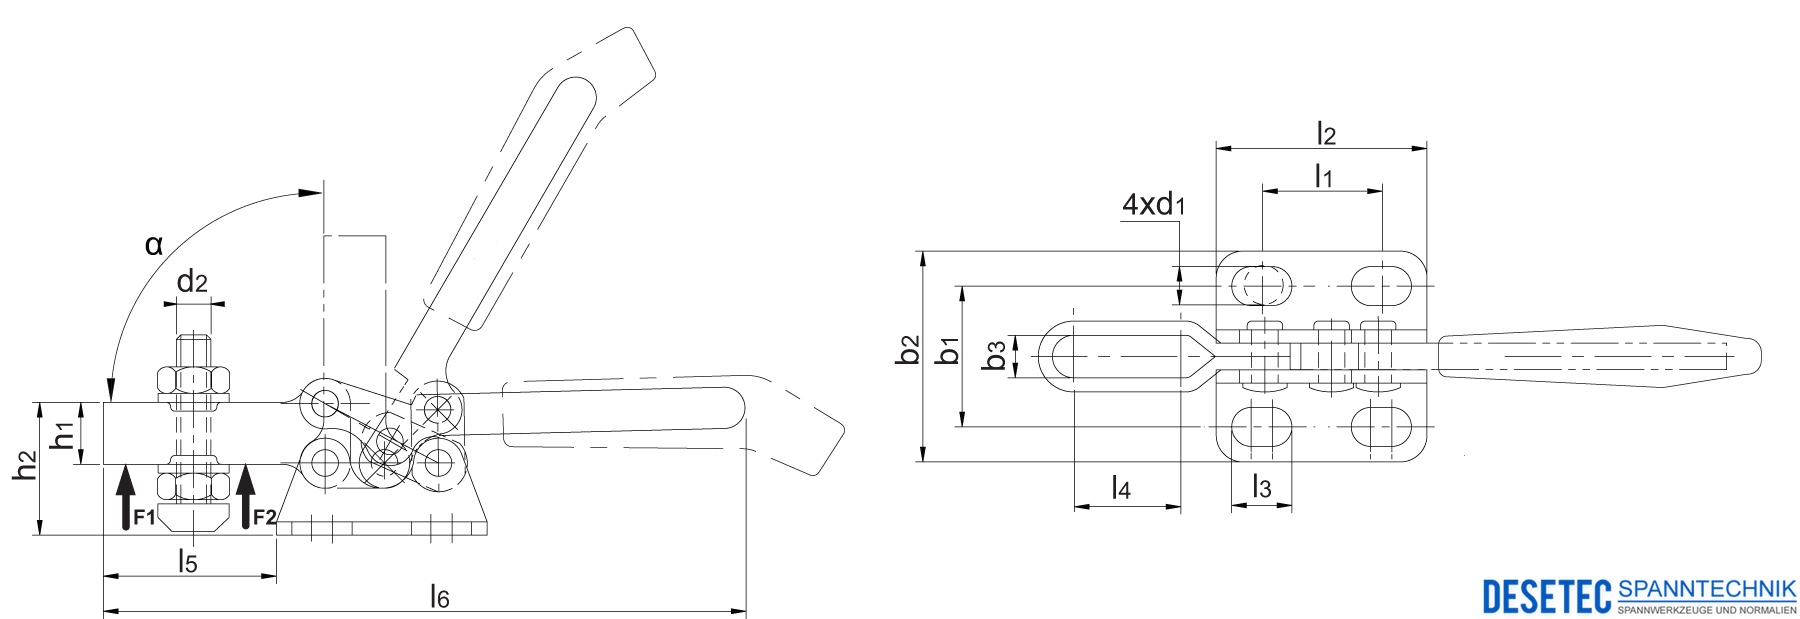 Technical Drawing Horizontal toggle clamps wit horizontal base